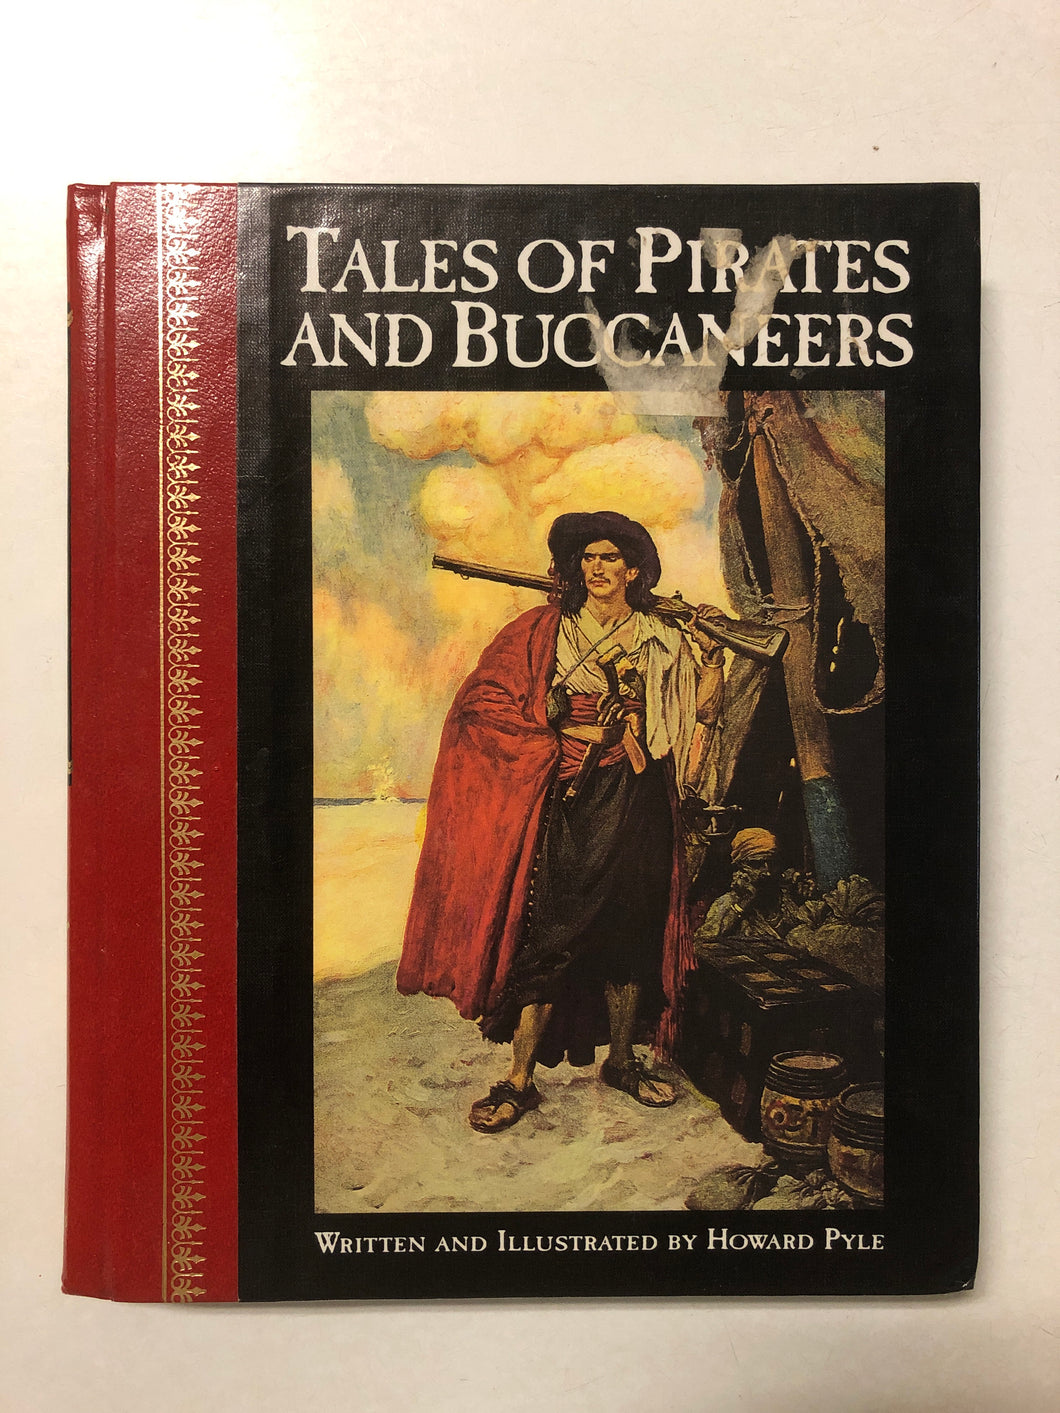 Tales of Pirates and Buccaneers - Slick Cat Books 